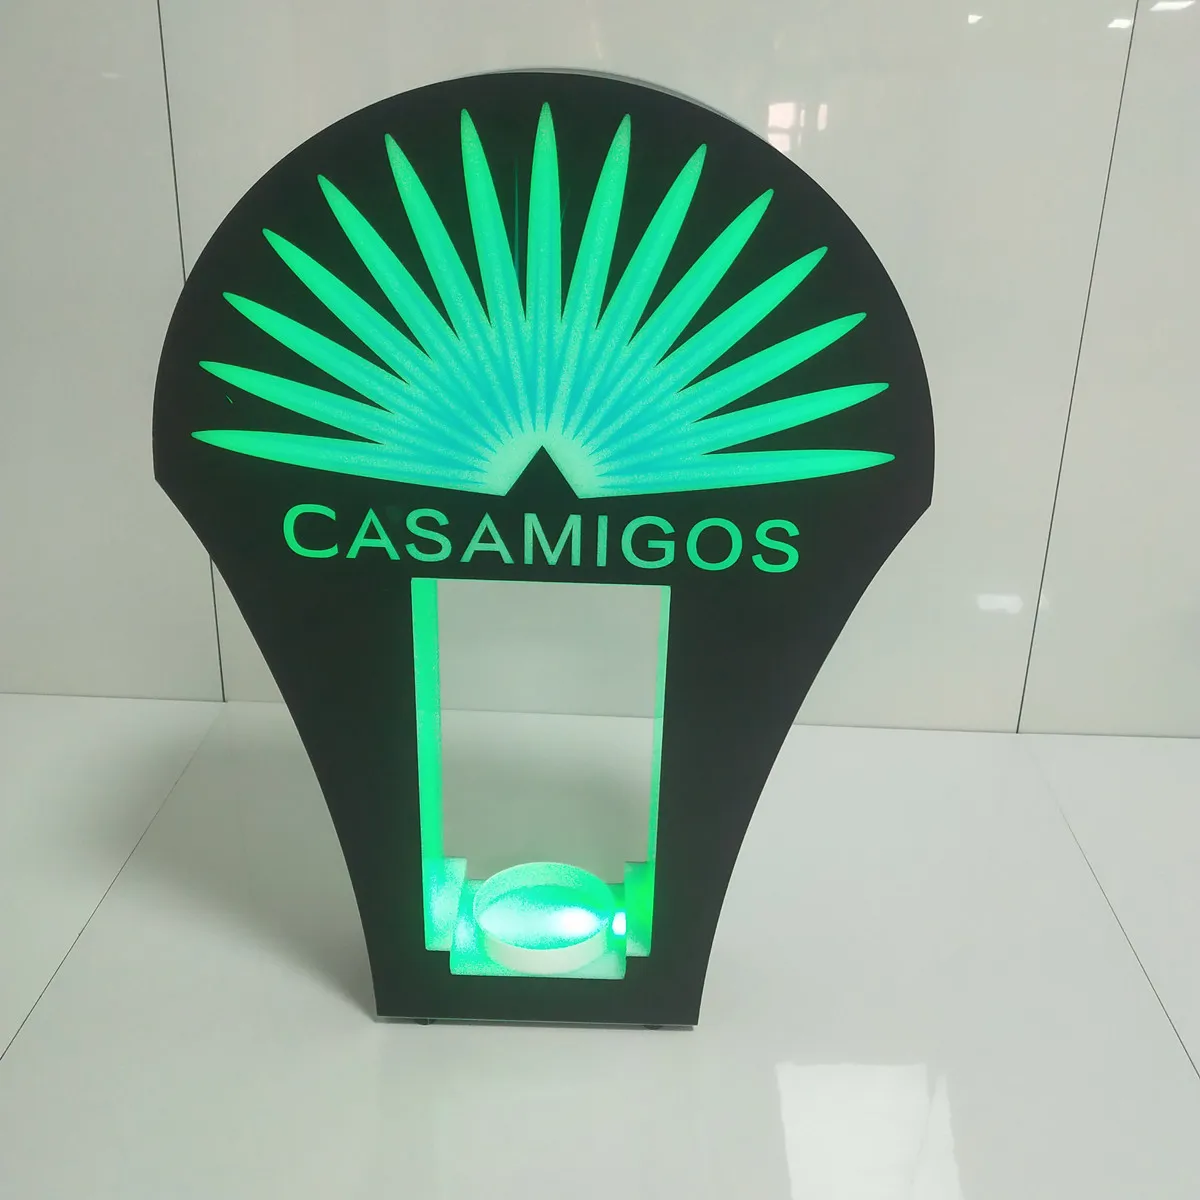 CASAMIGOS Luminous Display Bottle Service Hot Sales Lighting And Wine Box LED Foreign Wine Base